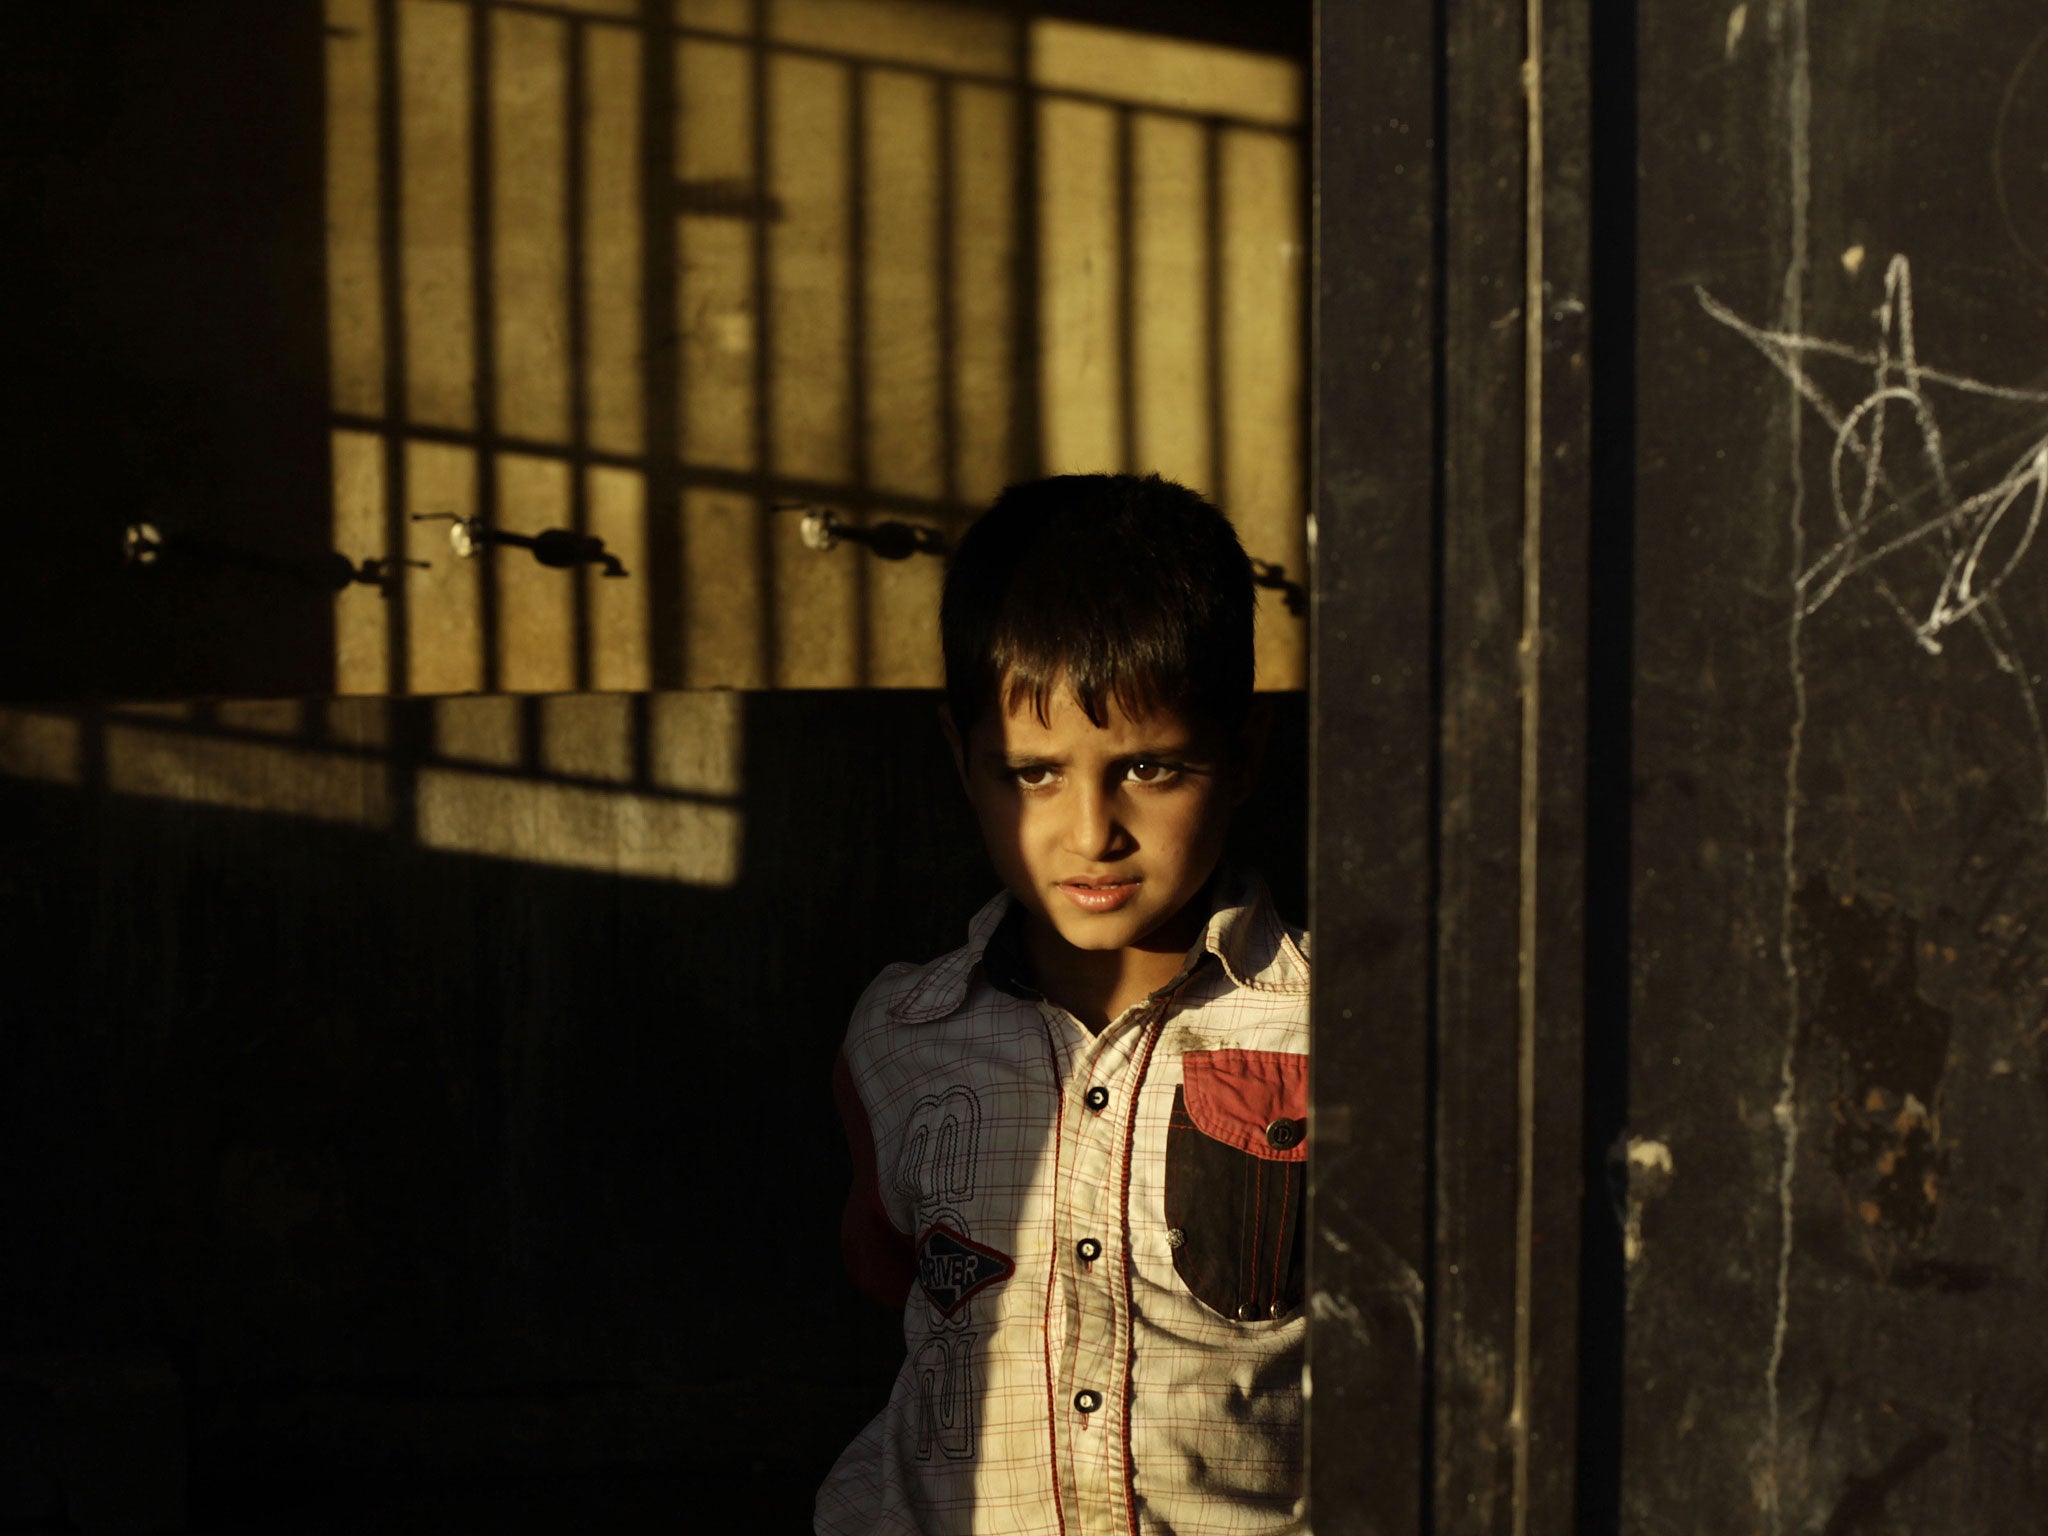 According to Unicef, 500,000 Syrian refugee children are now in Lebanon